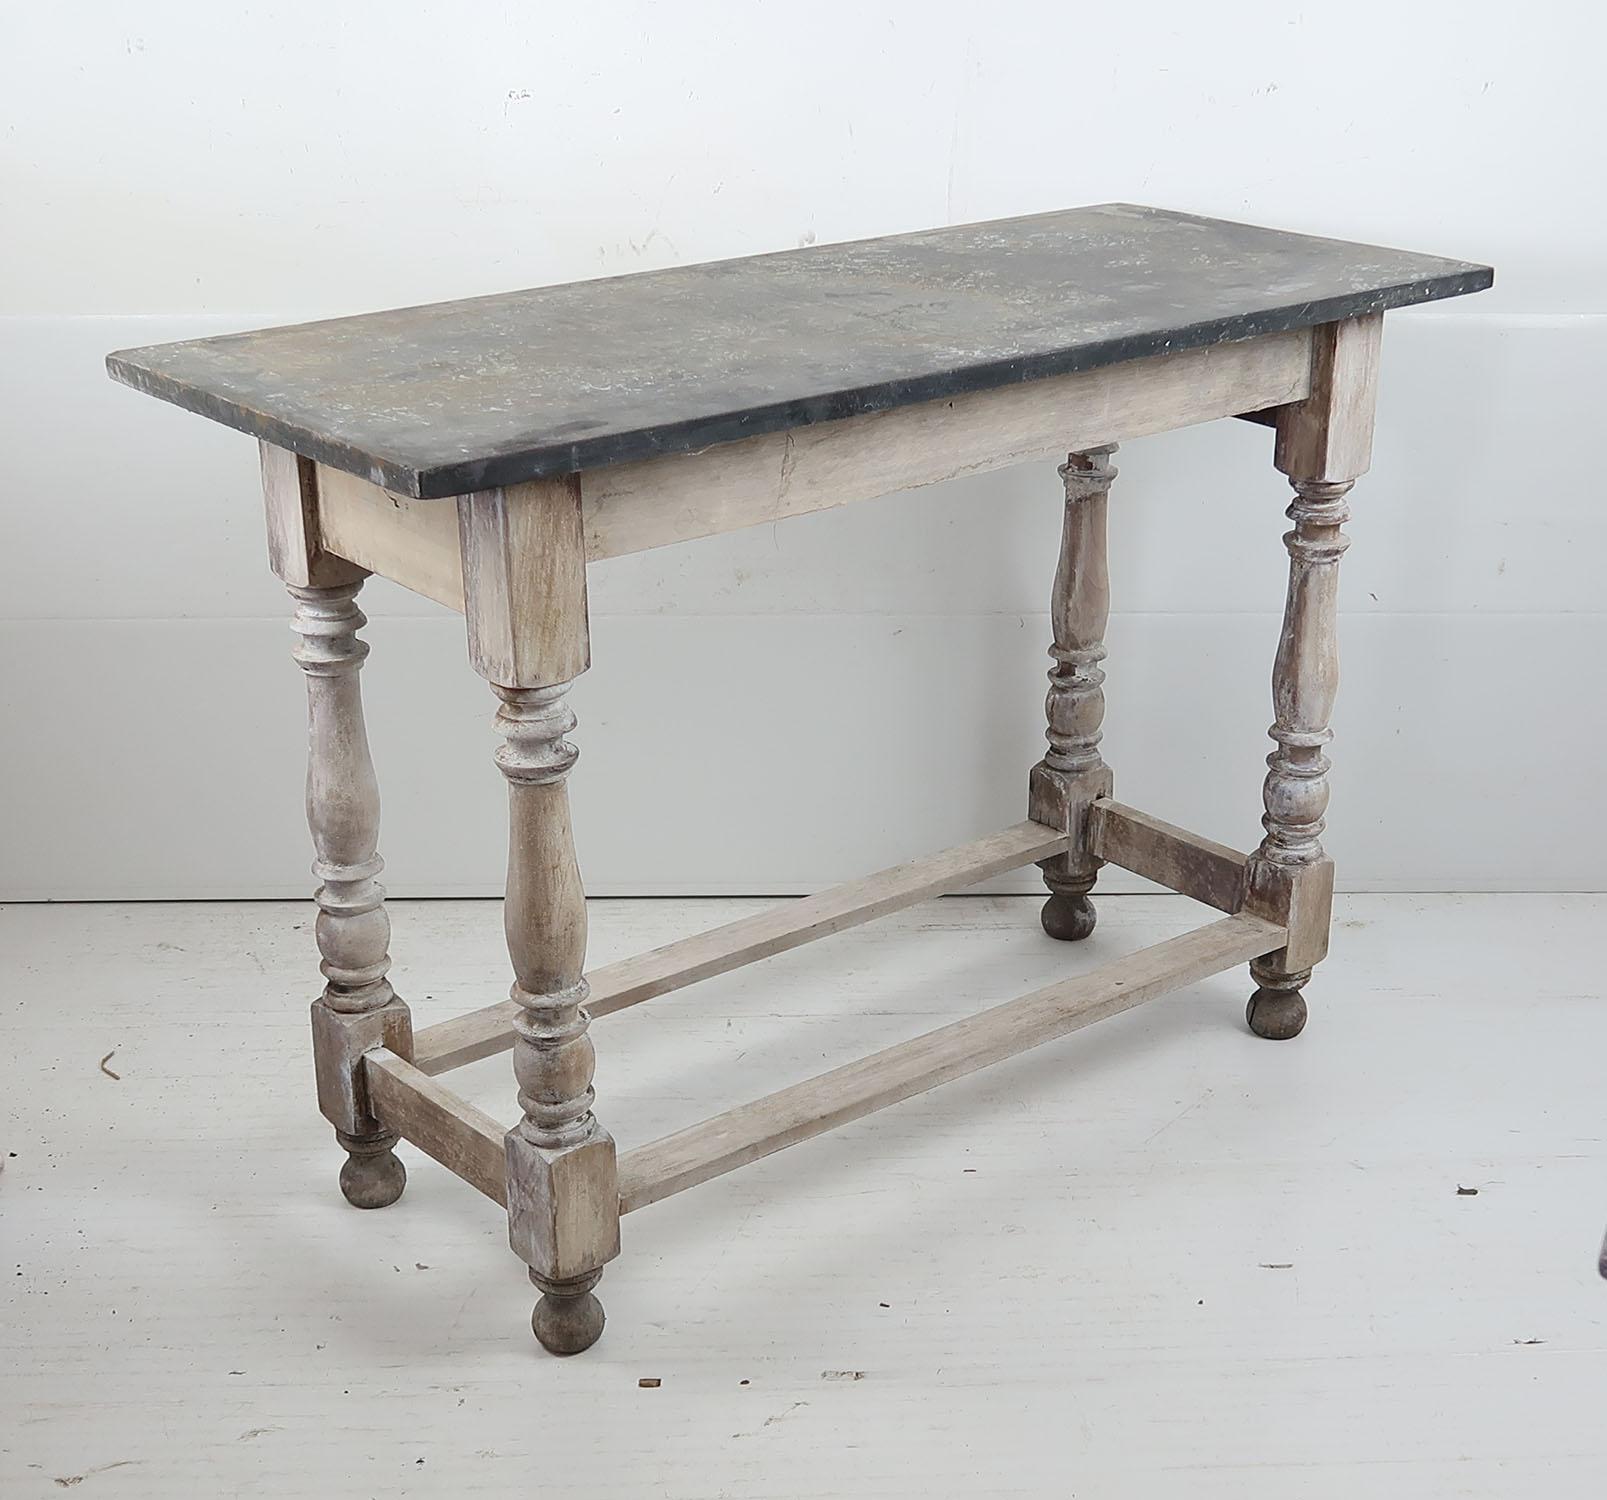 Bleached Small Antique Marble Topped Side Table, English, 19th Century